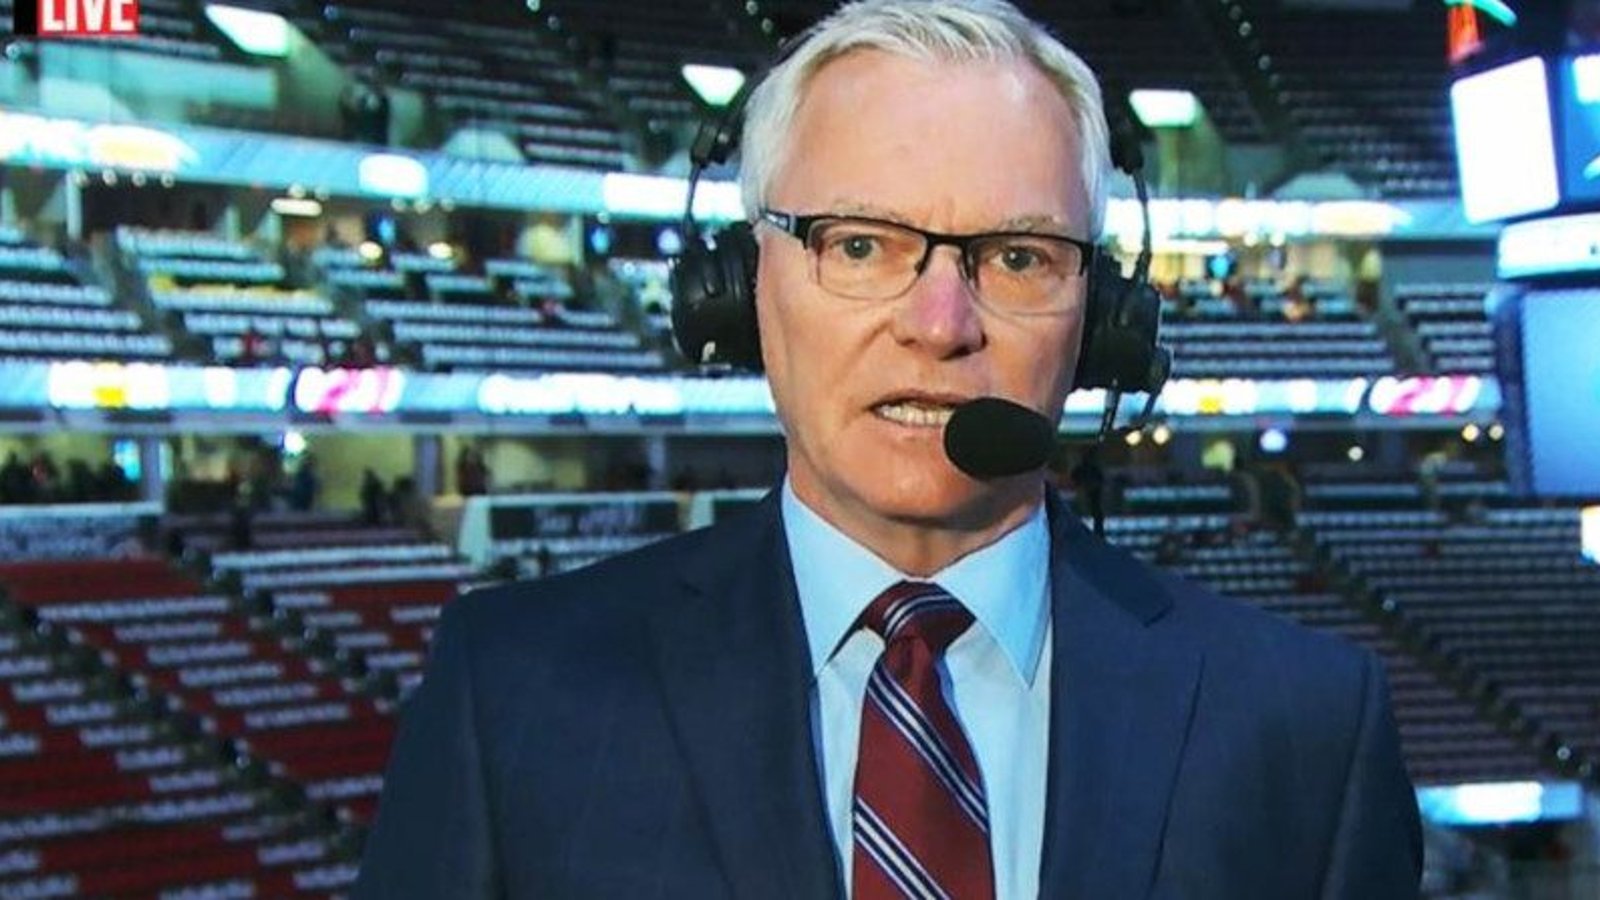 Sportsnet’s Jim Hughson finally apologizes for ‘inappropriate’ Matthews take on disorderly conduct 